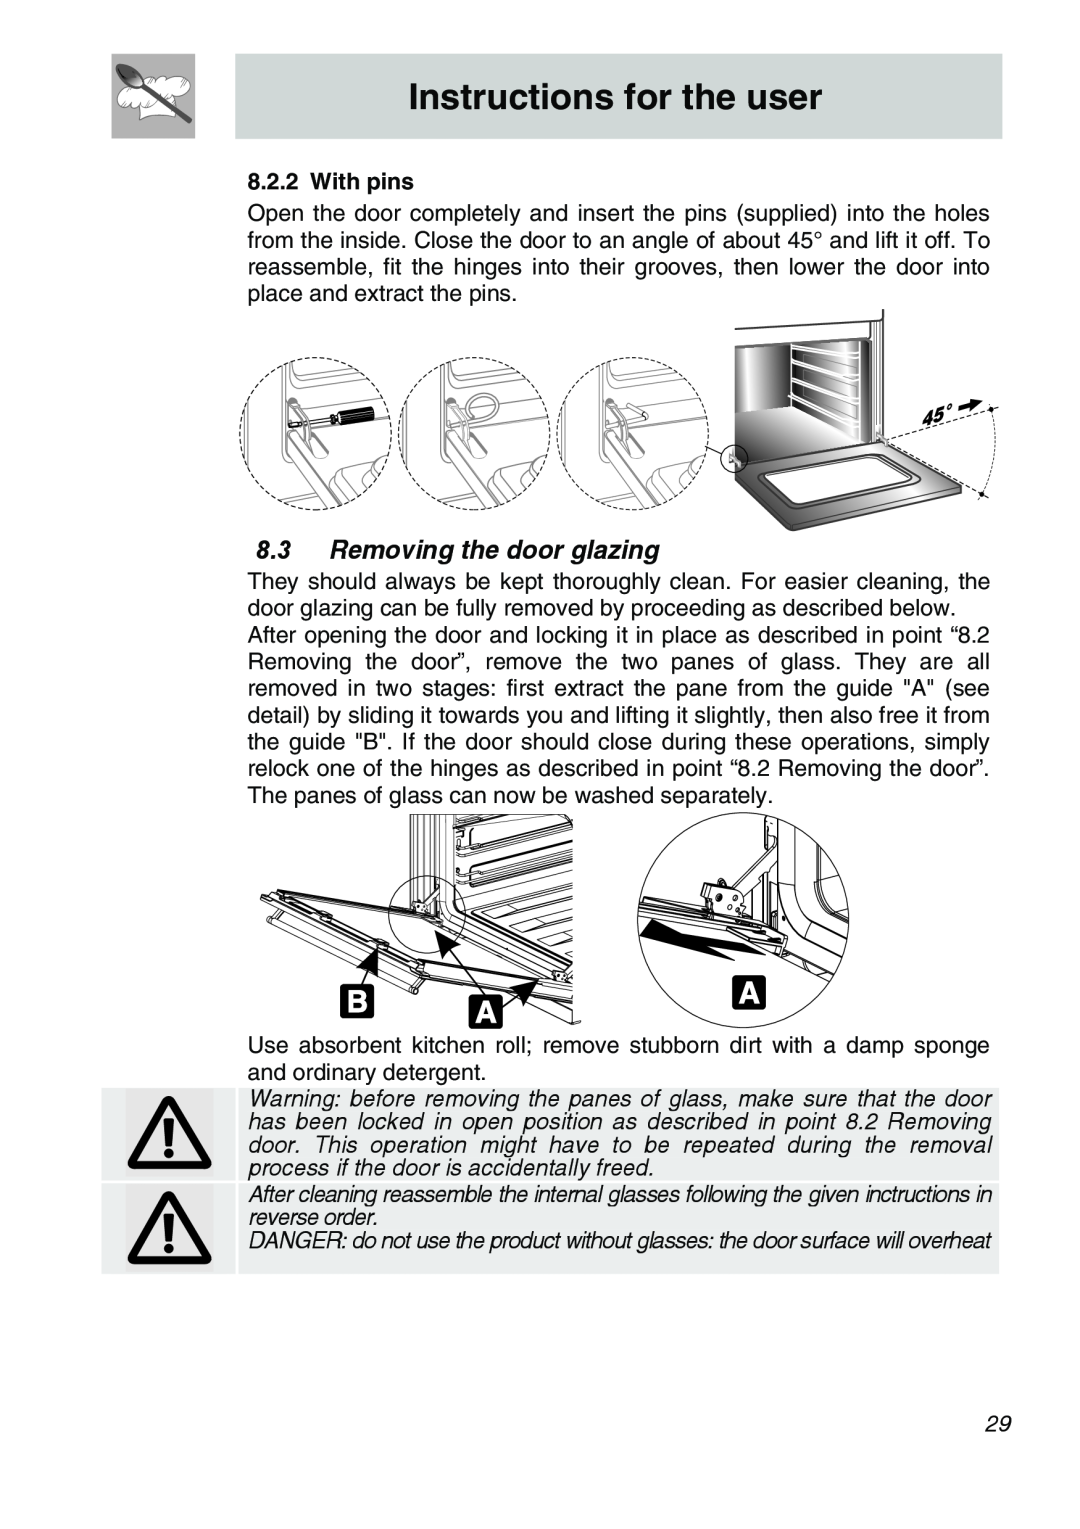 Smeg SA301W-5 manual 8.3Removing the door glazing, Instructions for the user, With pins 